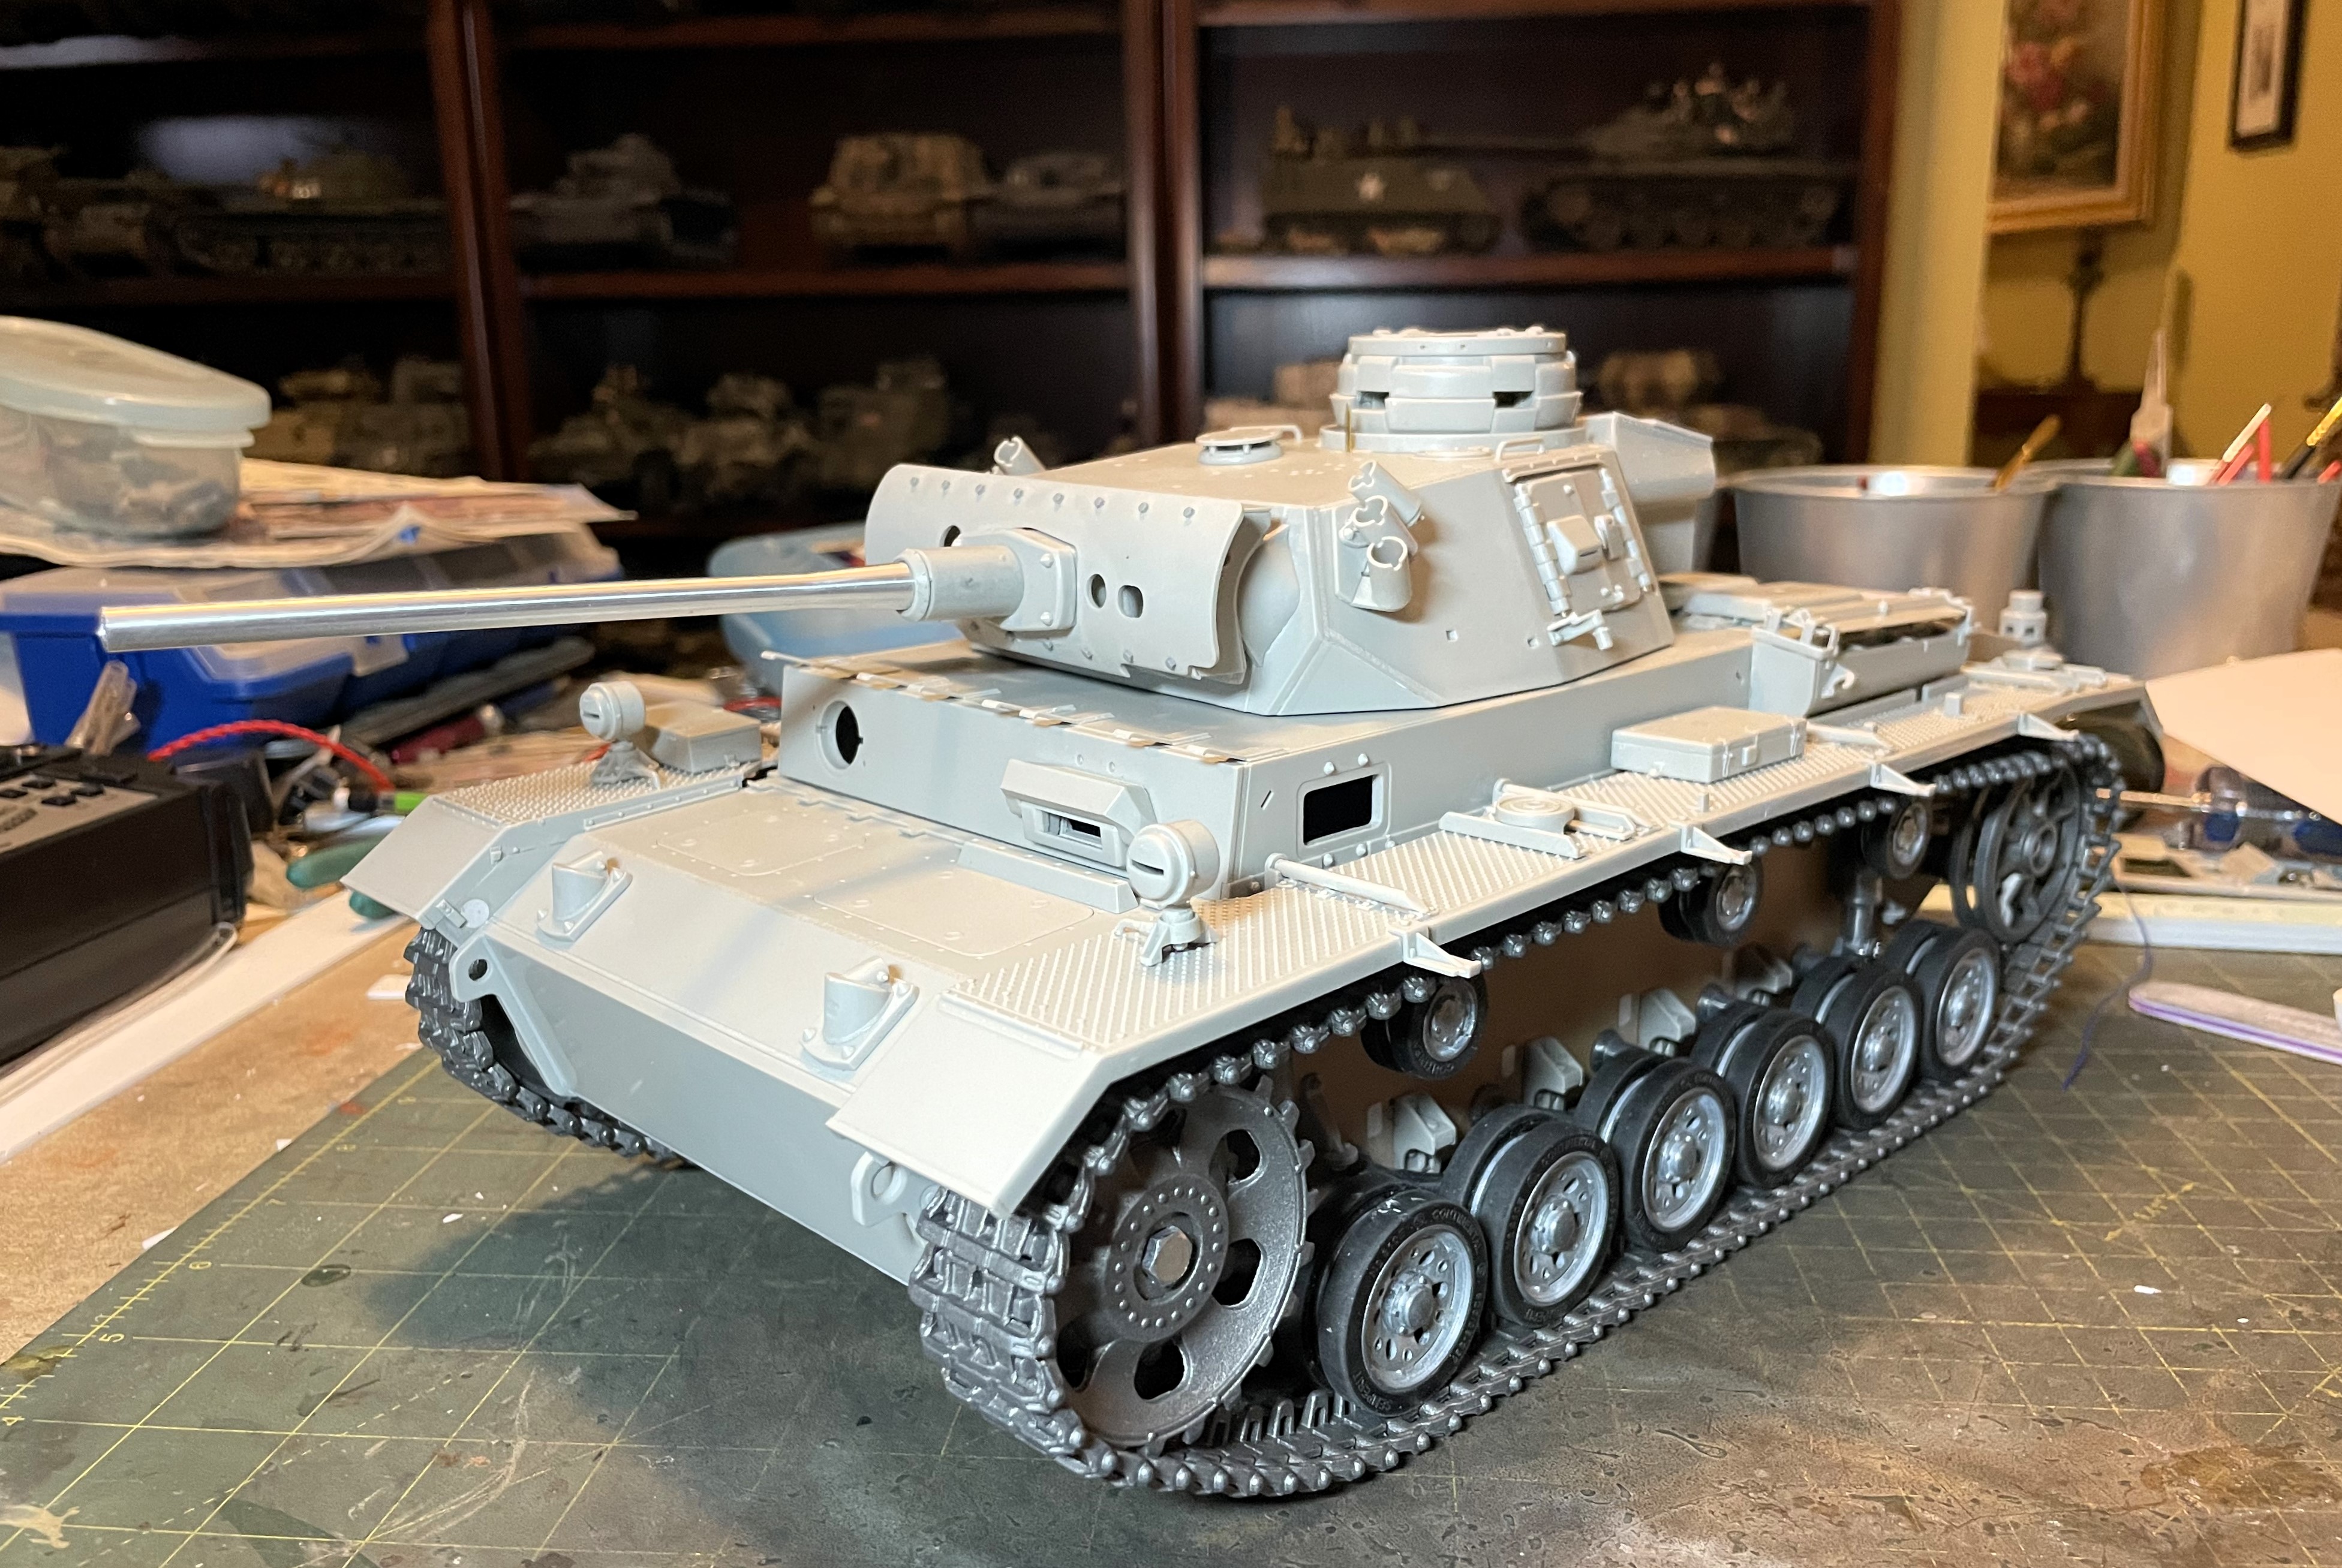 1/16 PzKpfw III Ausf M - Trumpeter/Heller kit with Taigen hull integration - Build